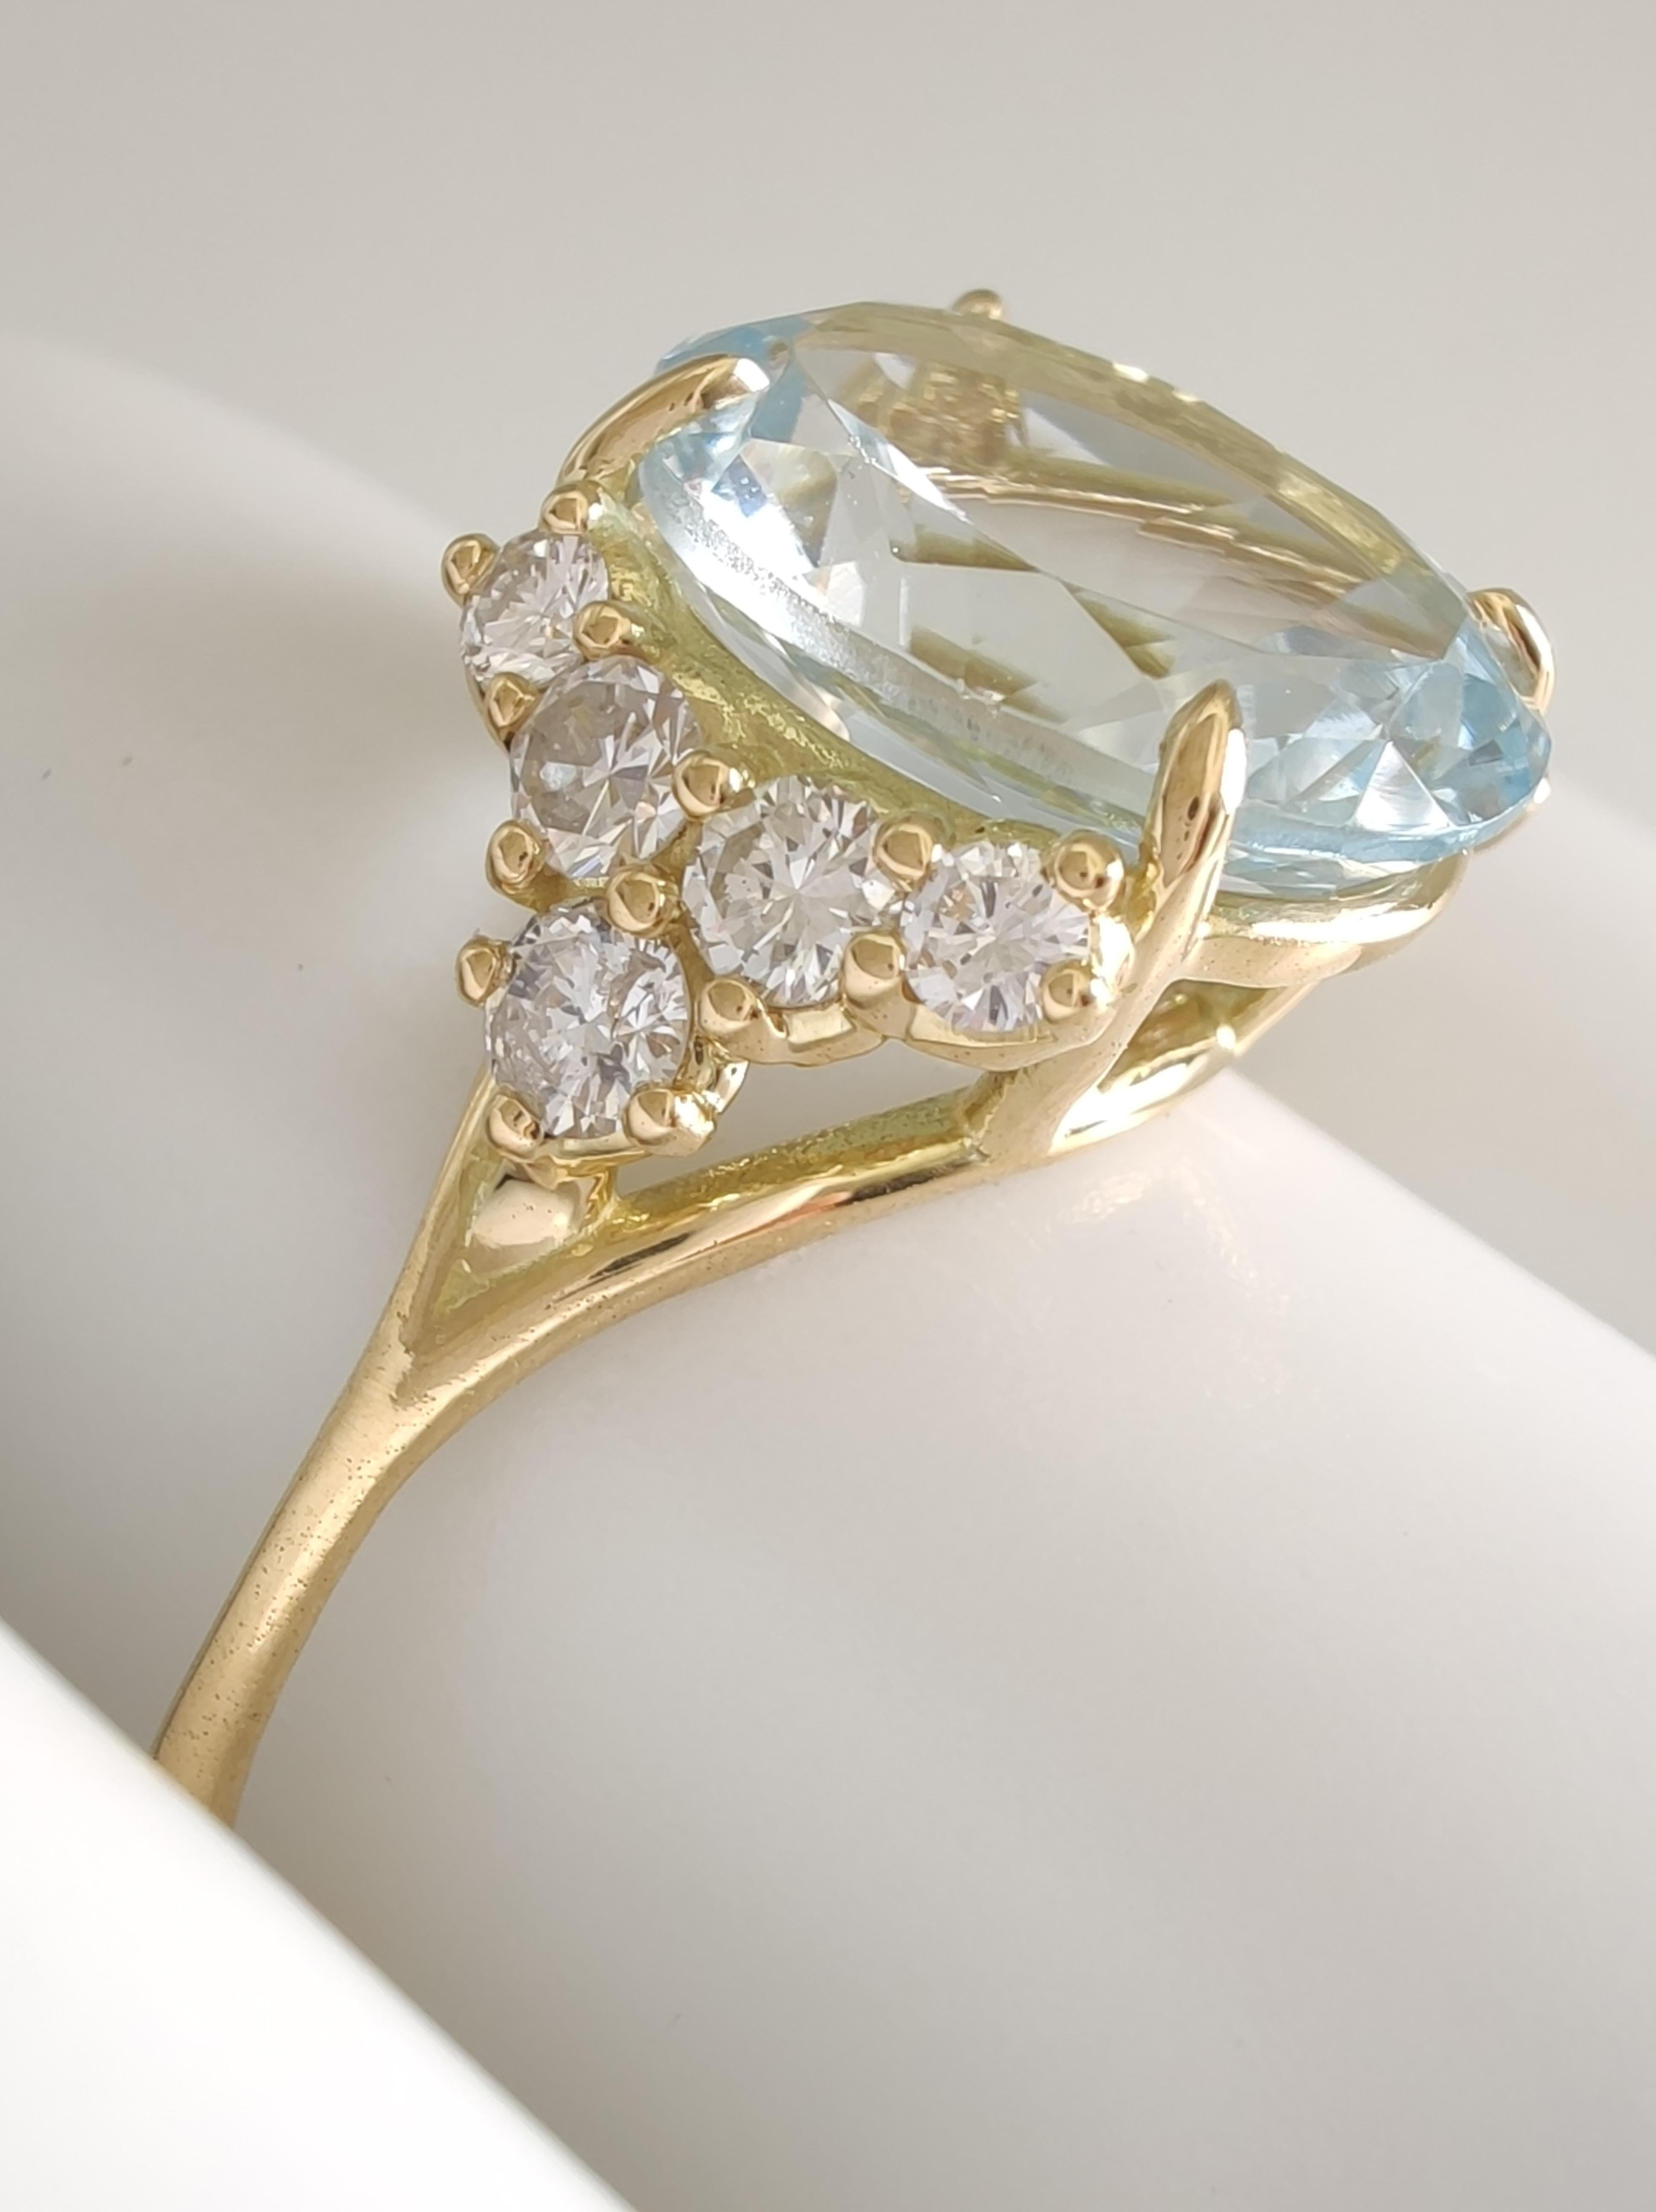 Oval Cut 2.69 Carat Aquamarine and 0.25 Carat Diamond Ring in 18k Yellow Gold For Sale